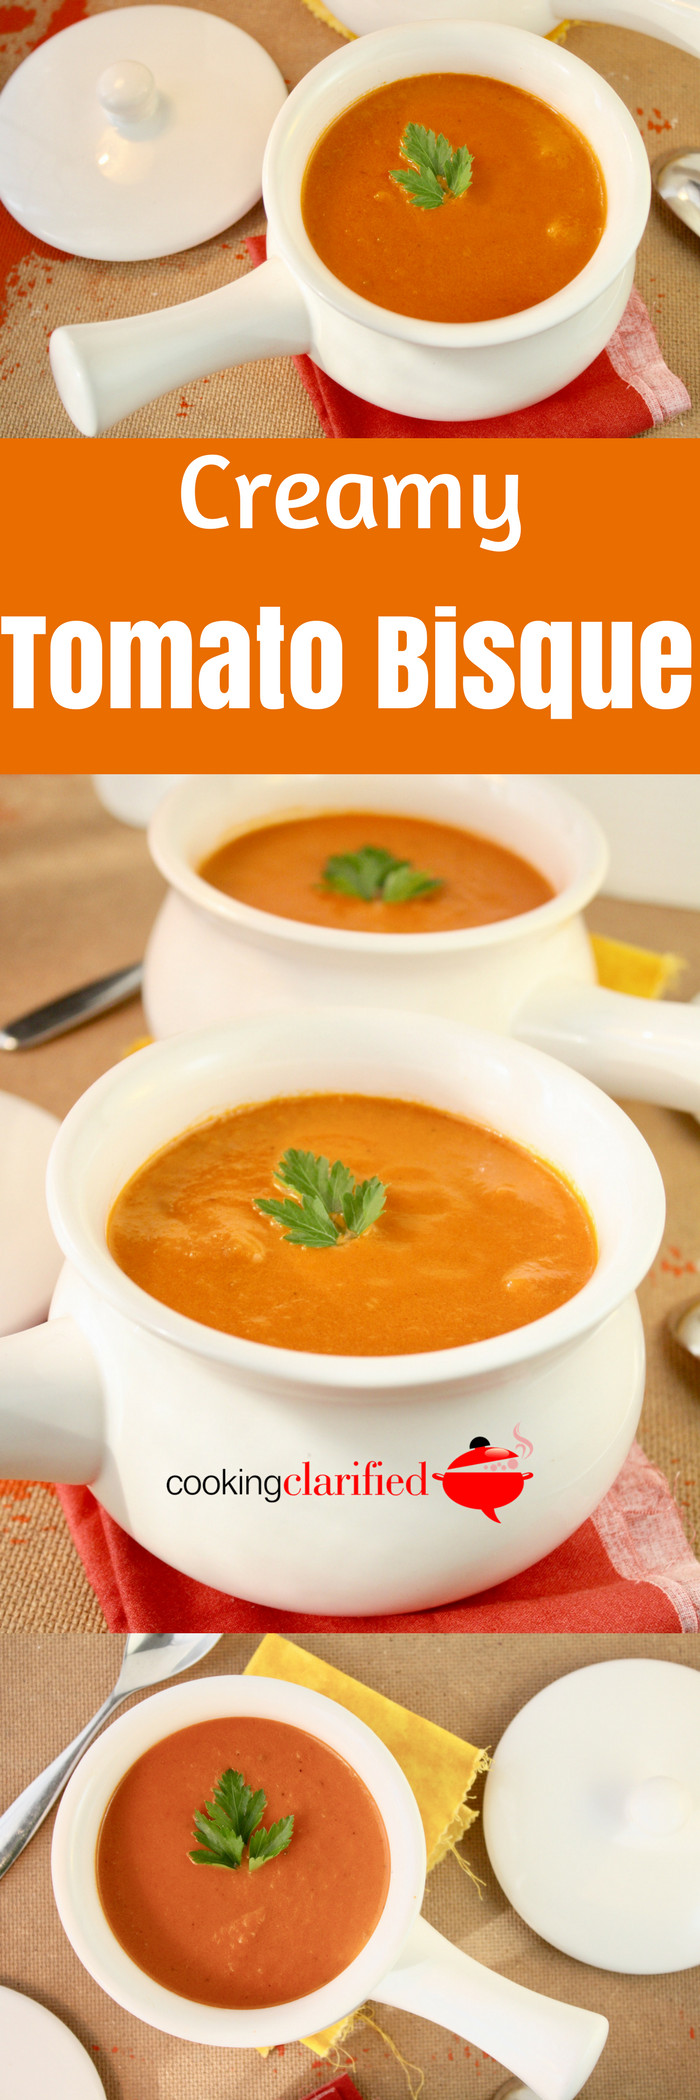 Difference Between Soup And Bisque
 Creamy Tomato Bisque Recipe